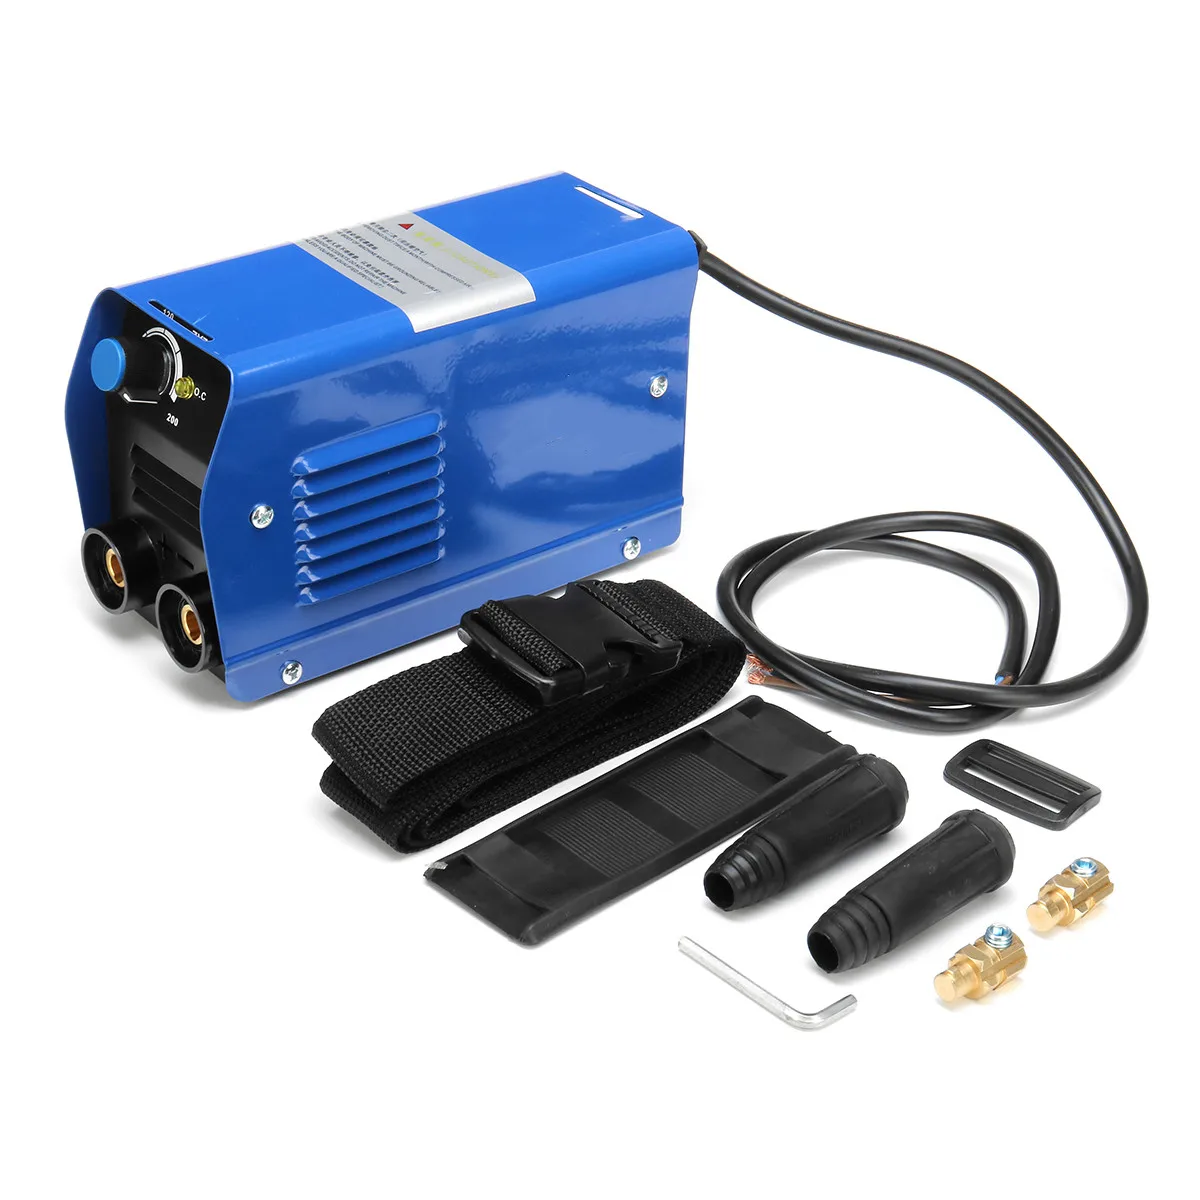 For free 220V Mini Electric Welding Machine Portable Solder 20-200A Inverter Soldering Tool ARC Welding Working